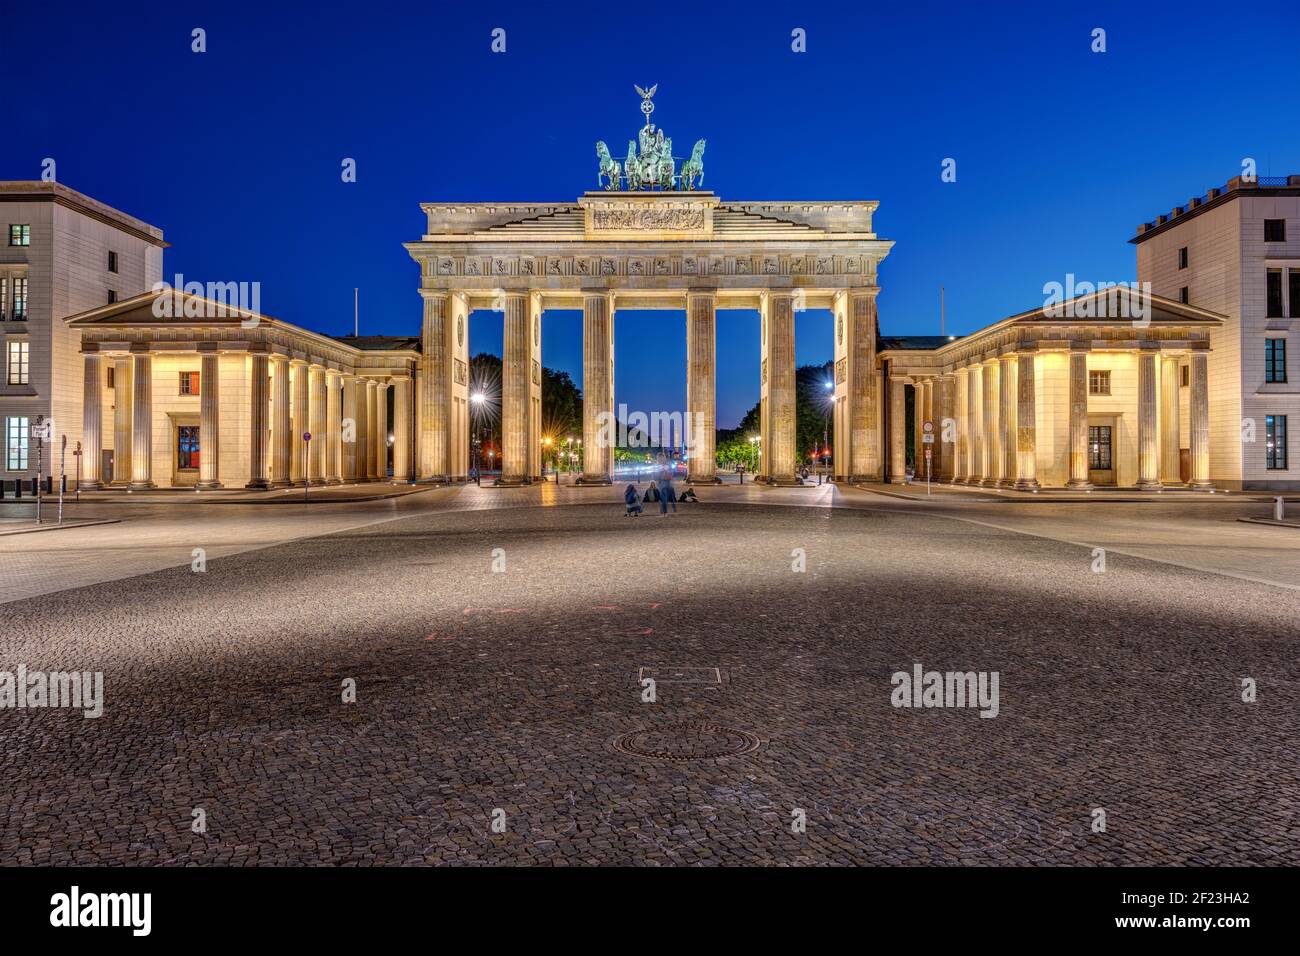 The famous illuminated Brandenburg Gate in Berlin at night with no people Stock Photo